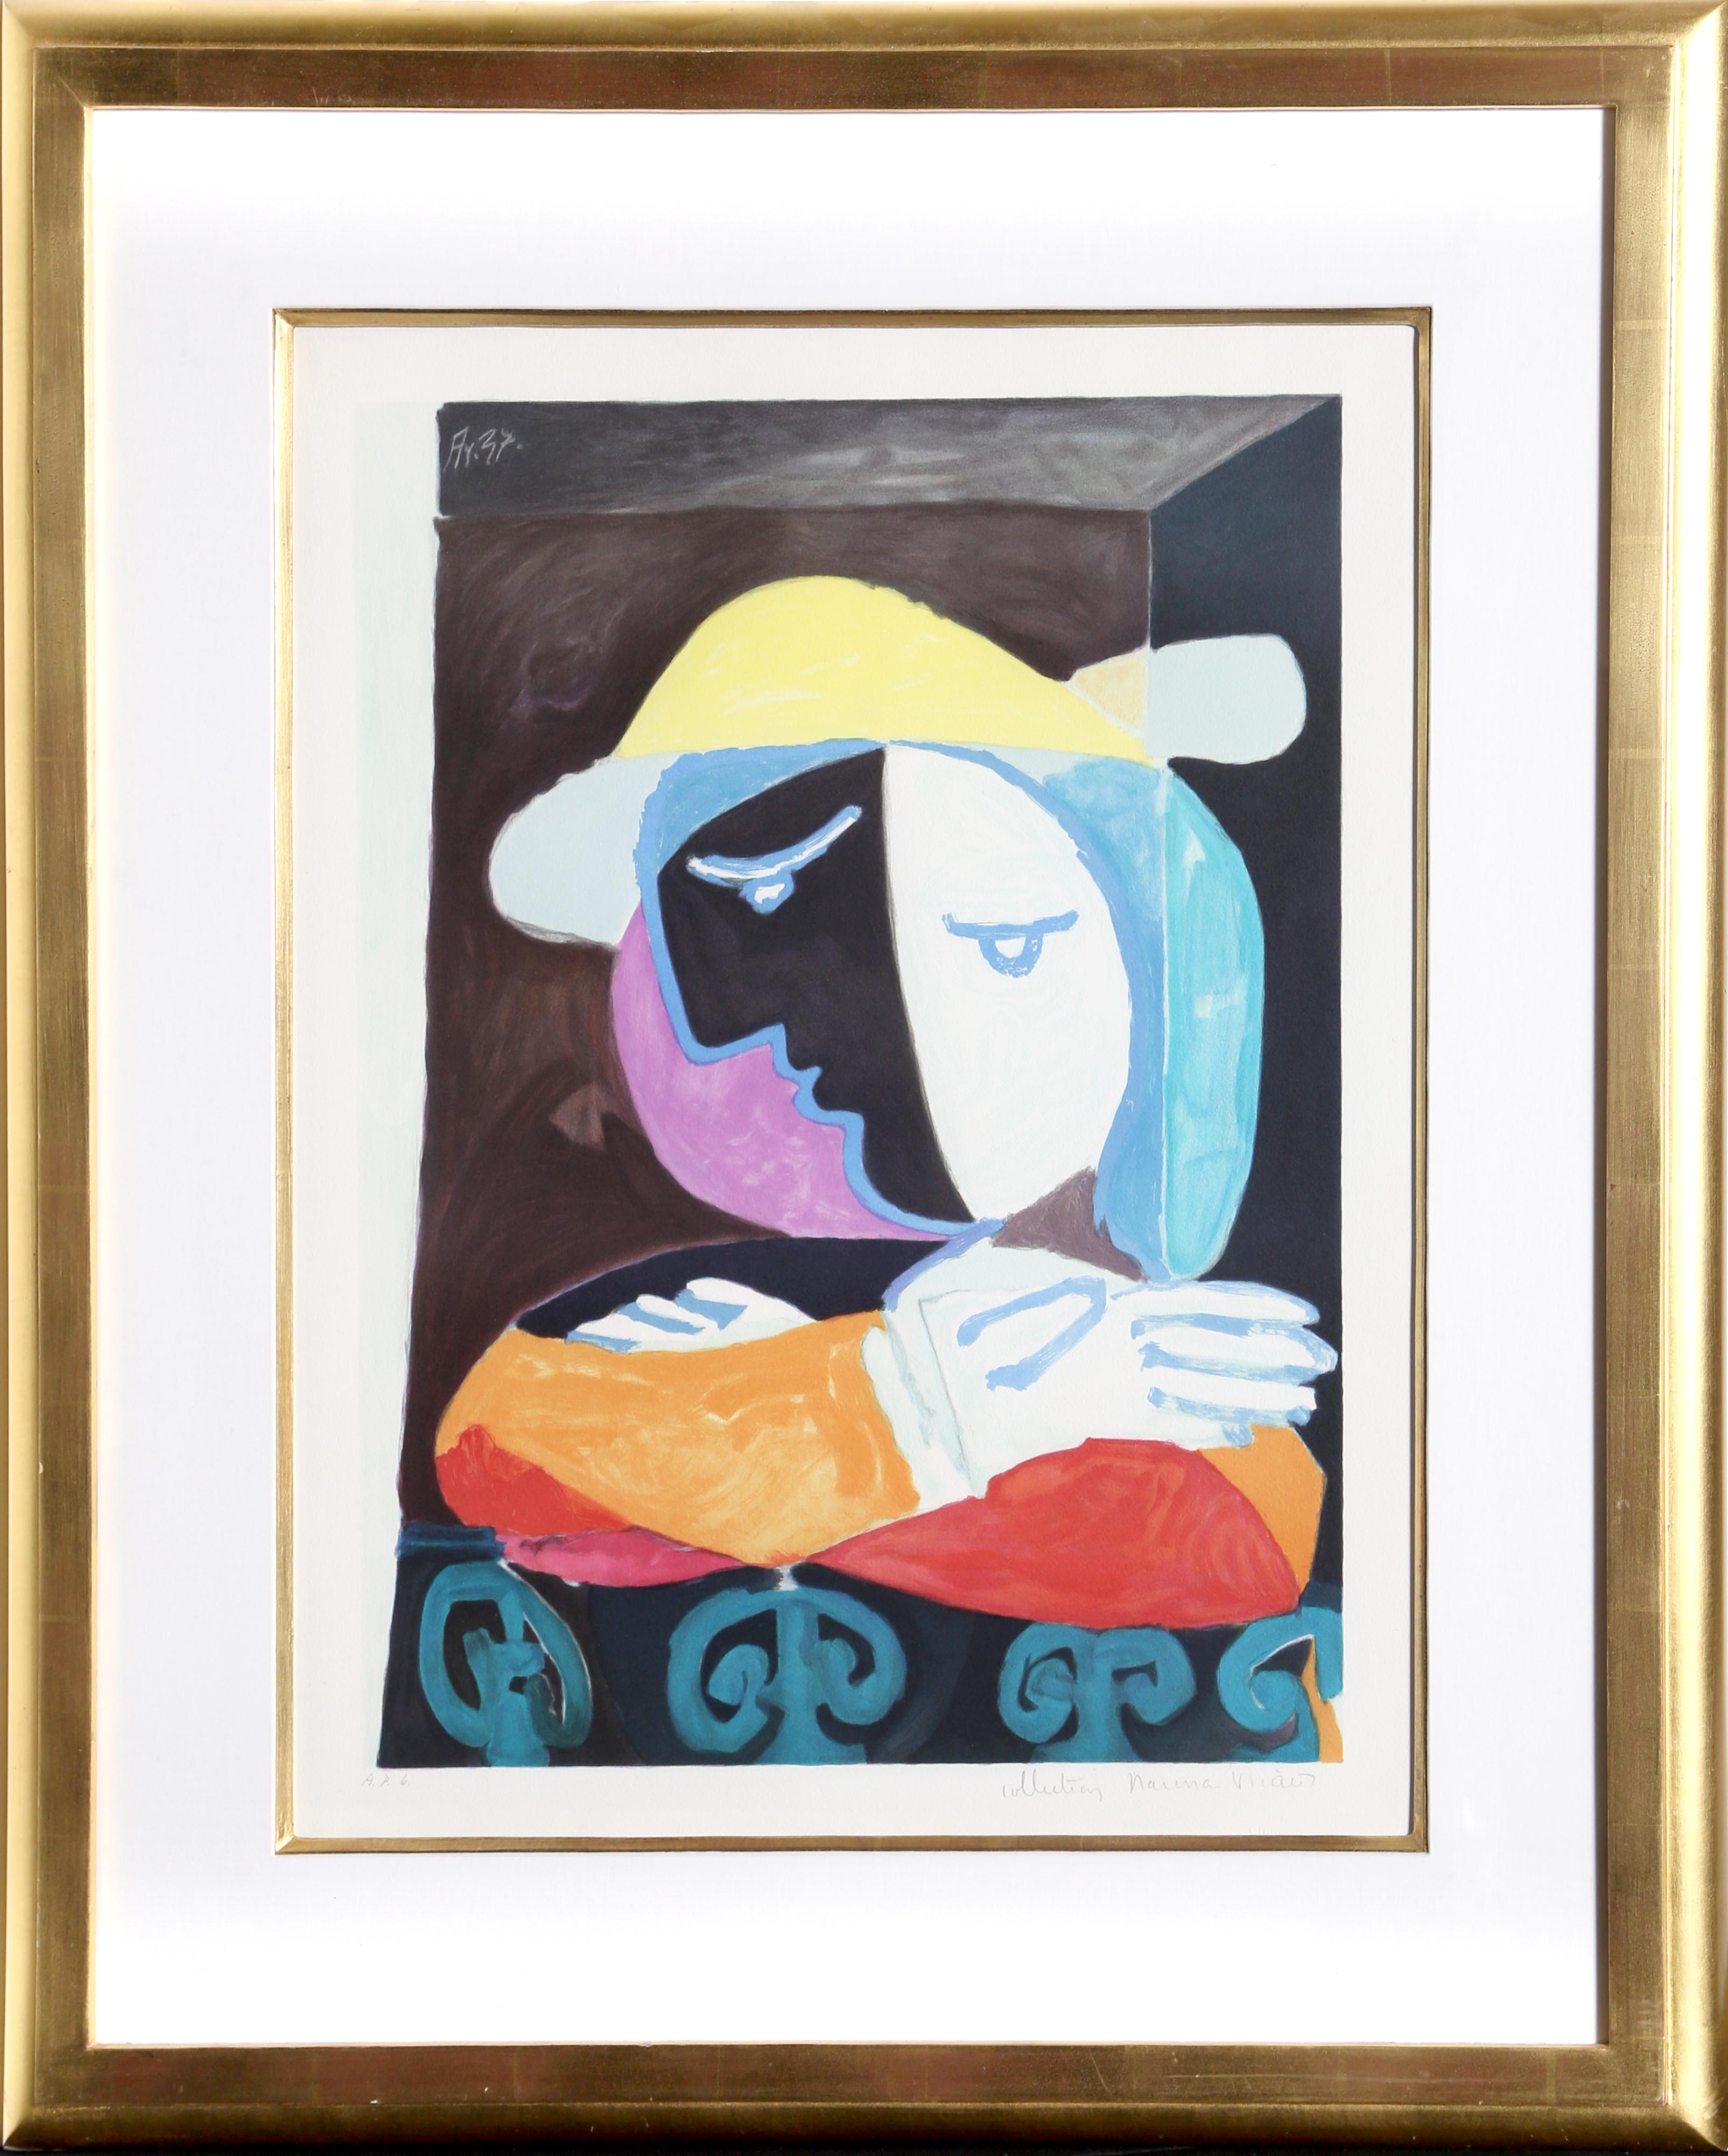 Leaning against the curved railing of the balcony, the model in this print is depicted through a series of shapes and forms of varying colors layered over one another. A lithograph from the Marina Picasso Estate Collection after the Pablo Picasso